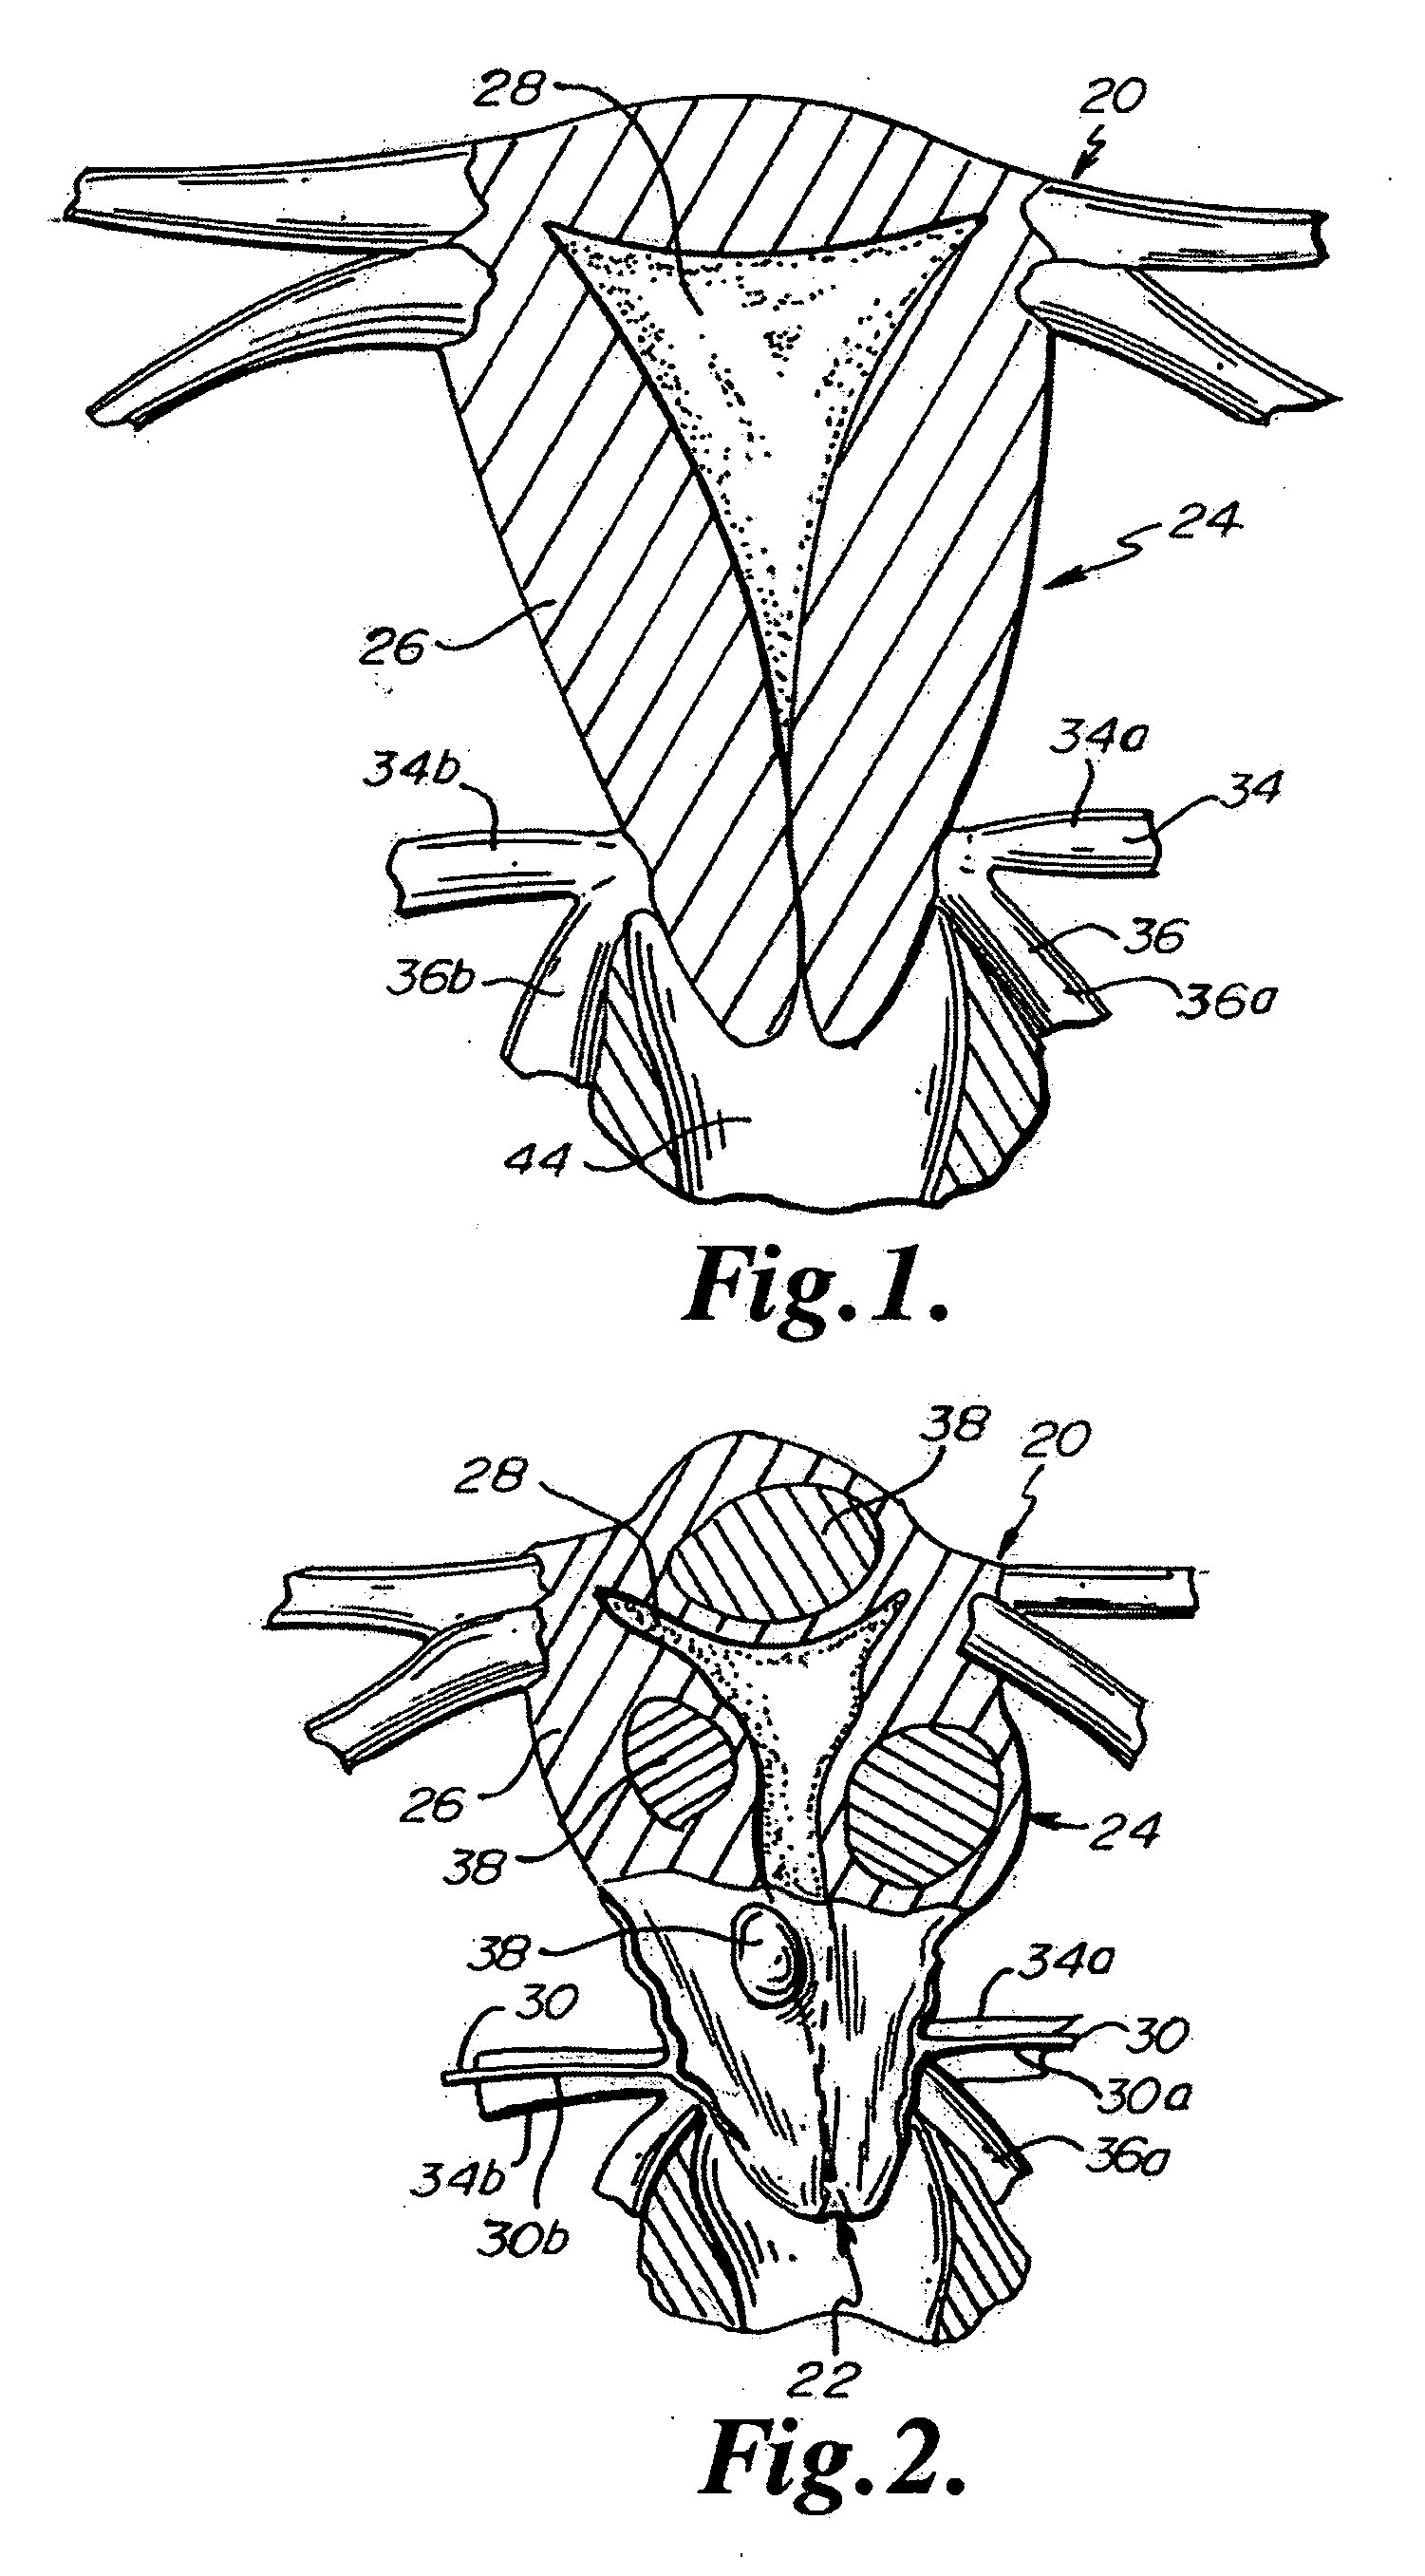 Devices and Methods for Ligating Uterine Arteries